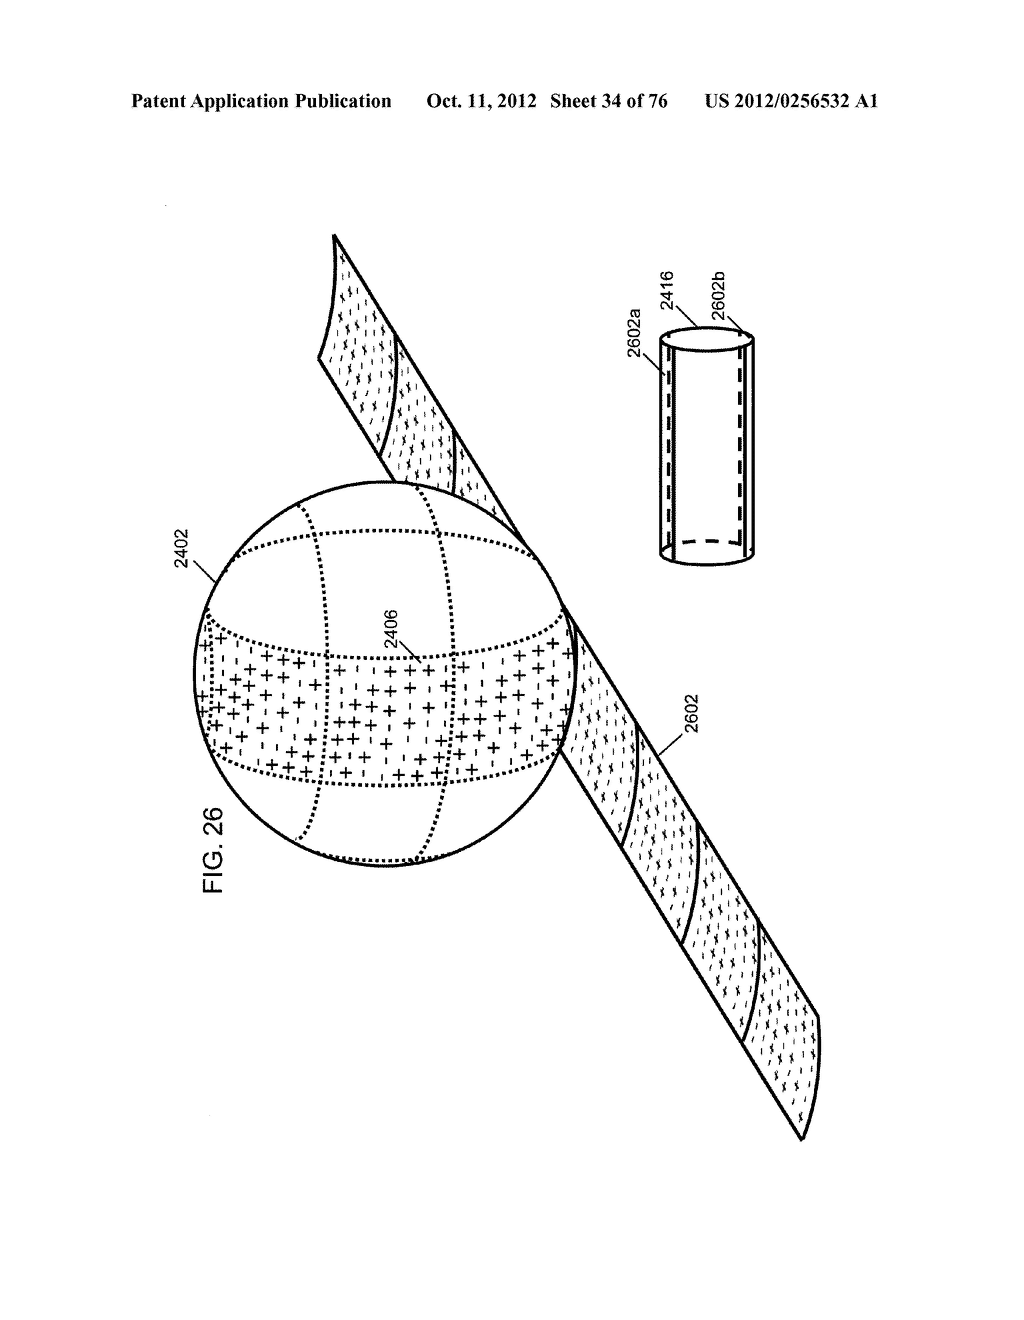 PANEL SYSTEM FOR COVERING A GLASS OR PLASTIC SURFACE - diagram, schematic, and image 35